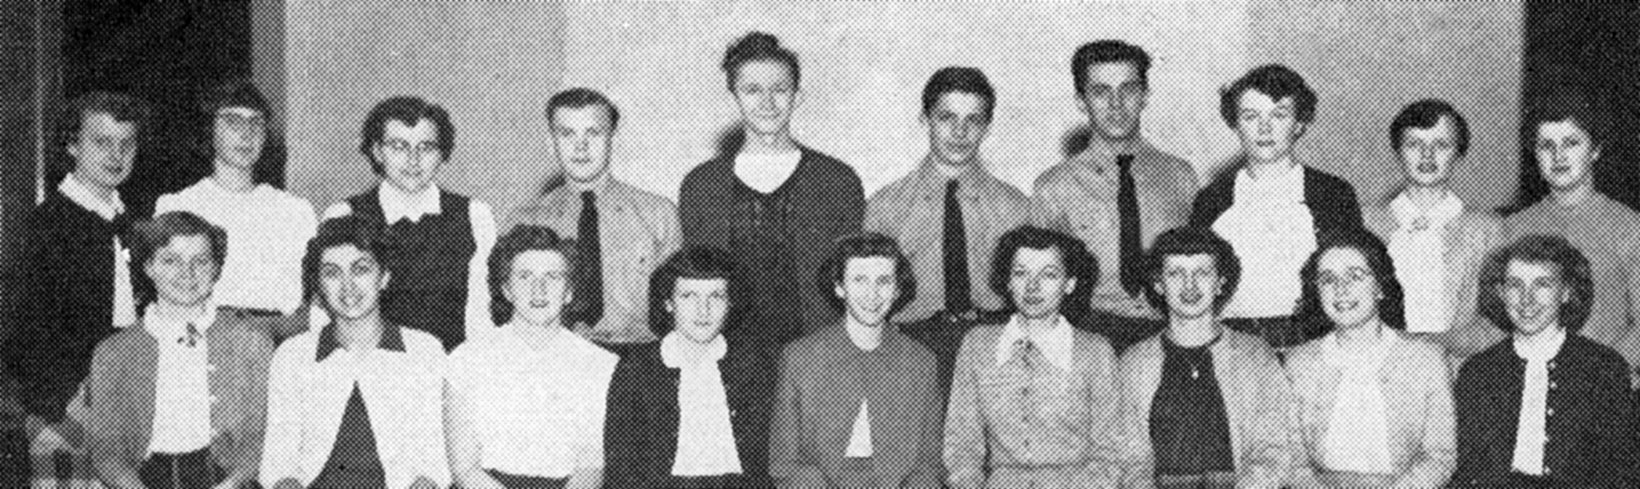 (Click to magnify ... poor quality original) FRONT ROW: N. Feir, Art Ed.; R. Hockley, E. Johnson, Lit. Eds.; B. McDonald, Soc.Ed.; J. Wilson, Editor-in-Chief; H. Meek, Assist. Soc. Ed.; S. Pickering, Pub. Ed.; B. Acton, L. Ferrell, Picture Eds. BACK ROW: 